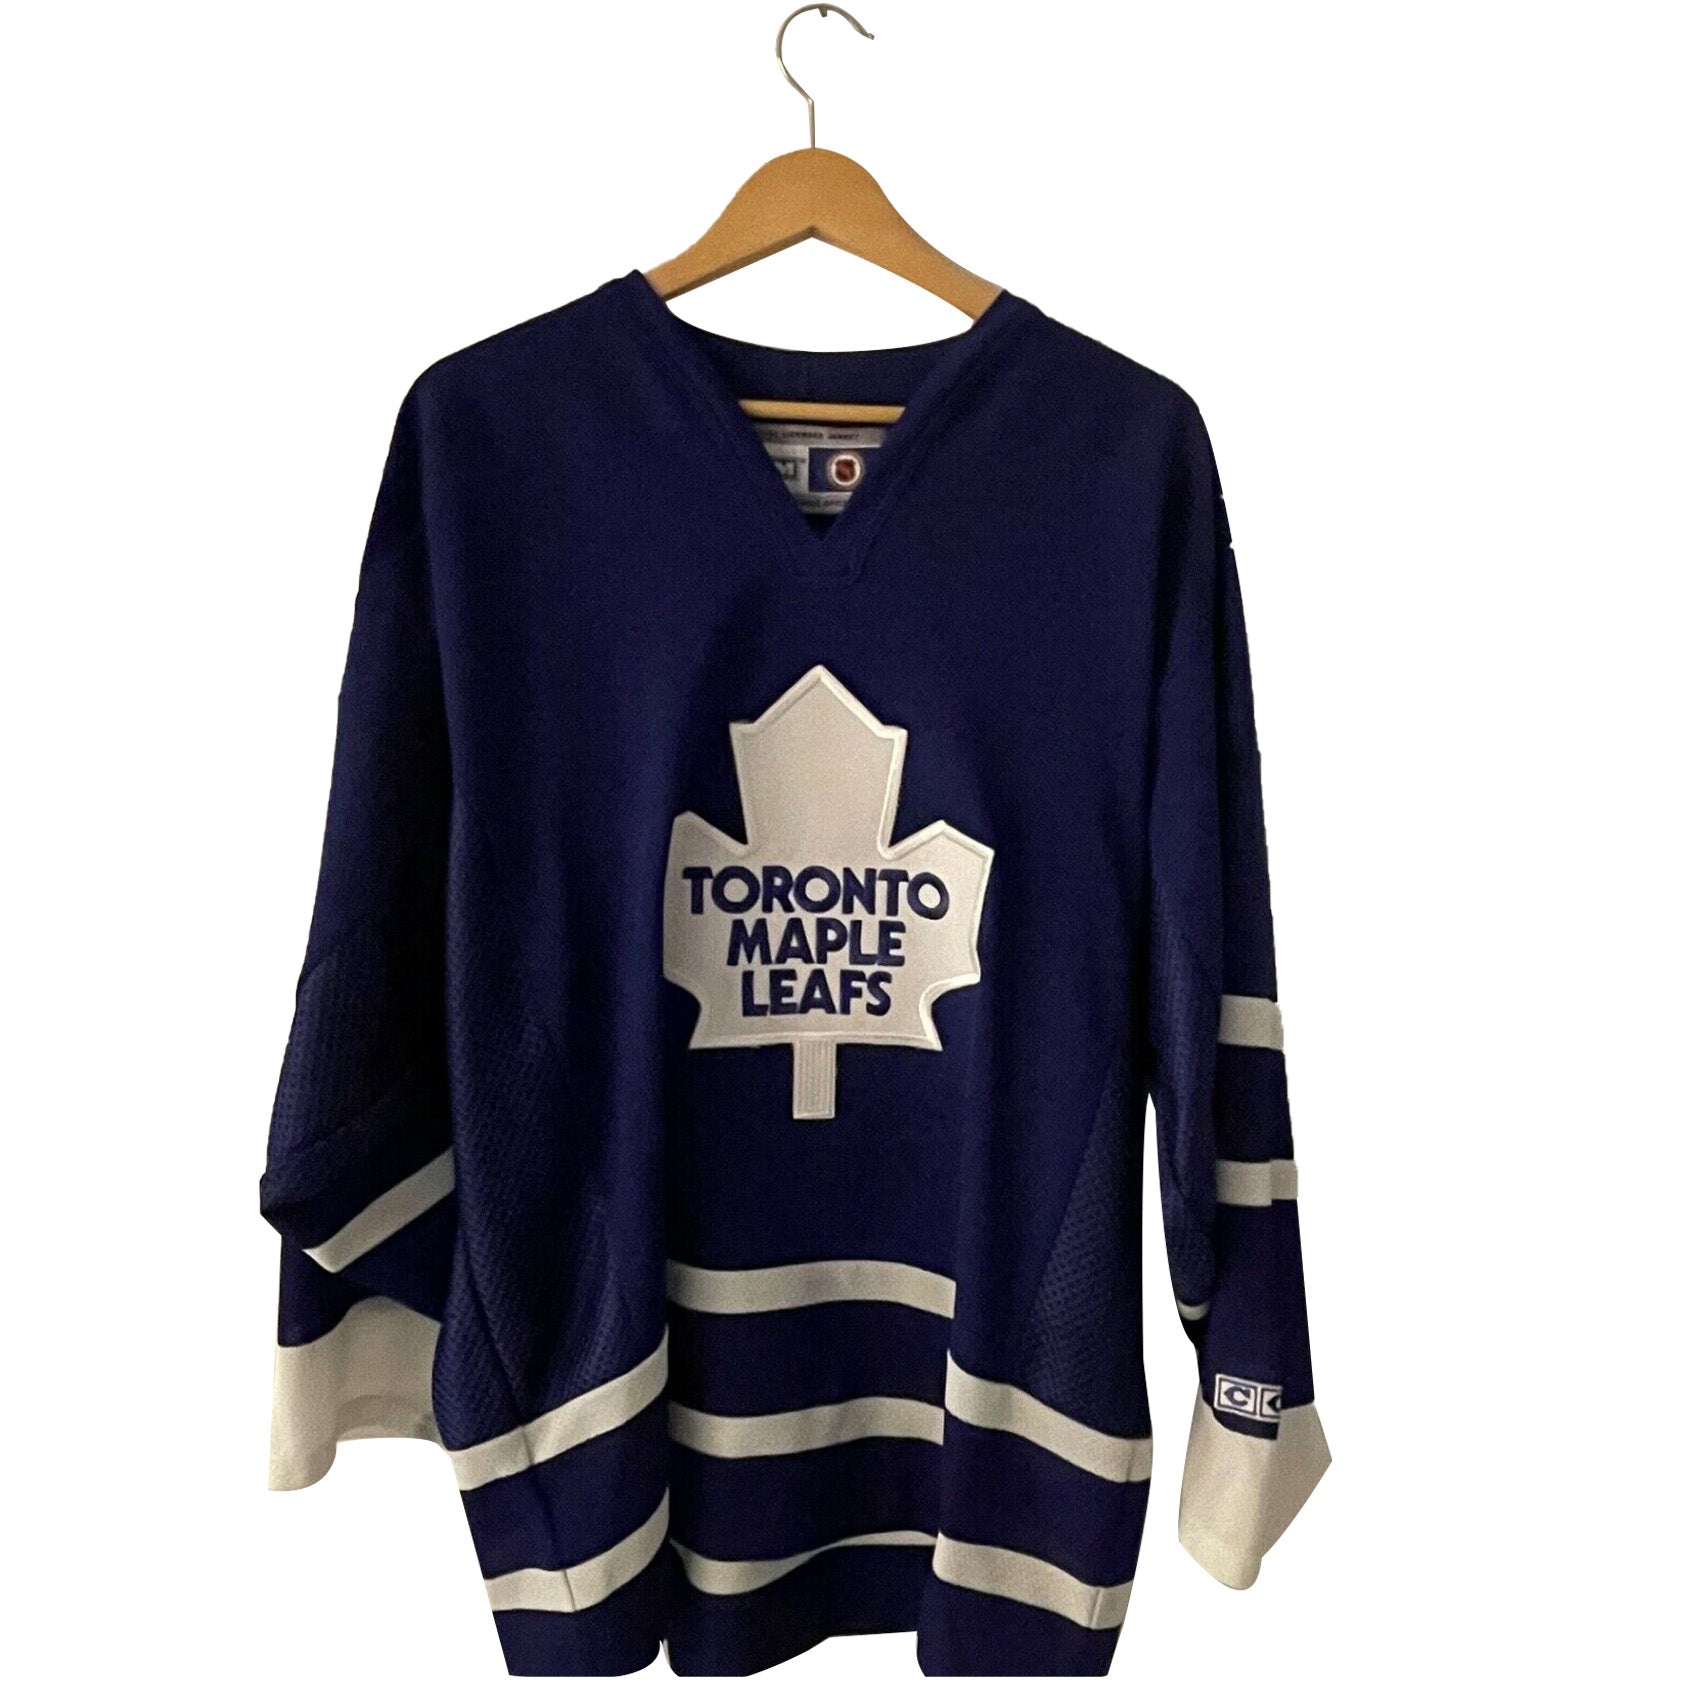 Toronto Maple Leafs CCM Knit Throwback Sweater Hockey Jersey Size Large